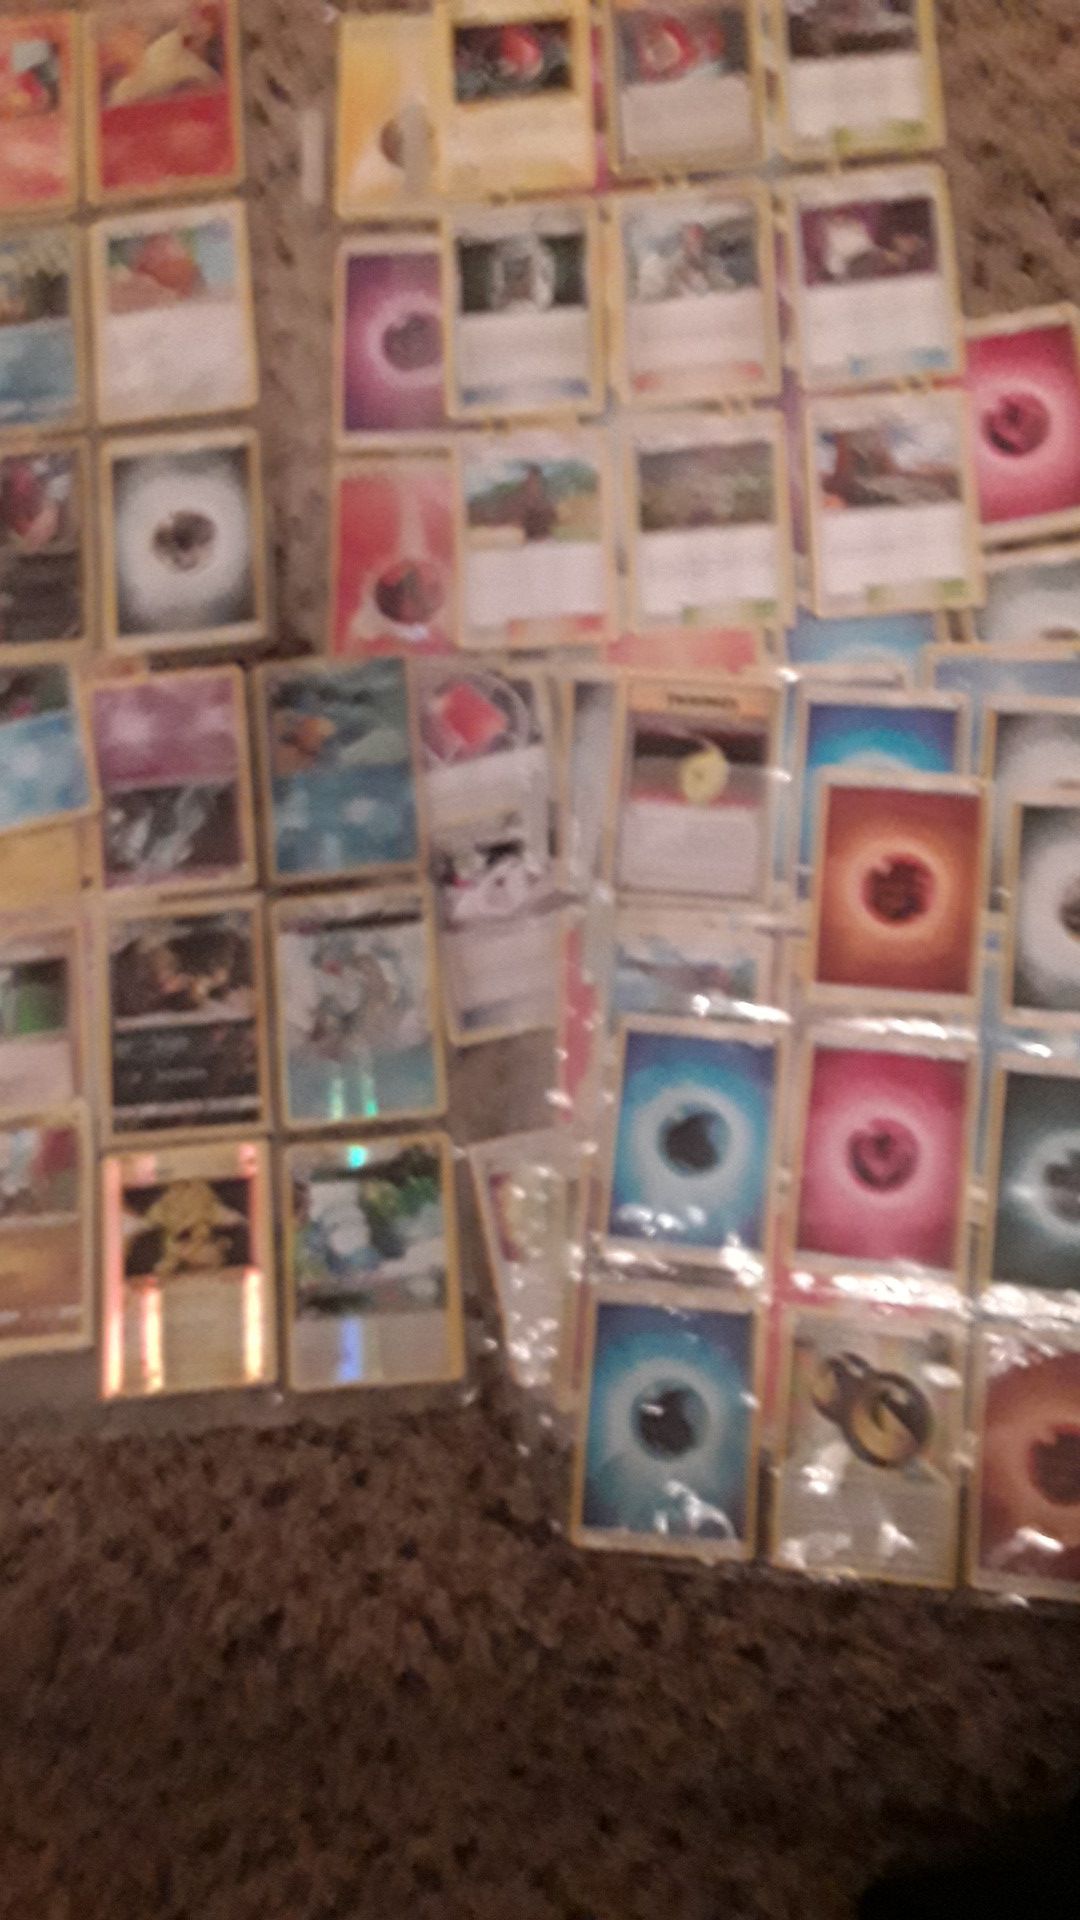 u fool an d lots more 378 Pokemon cards f42 9card sleeves including soil